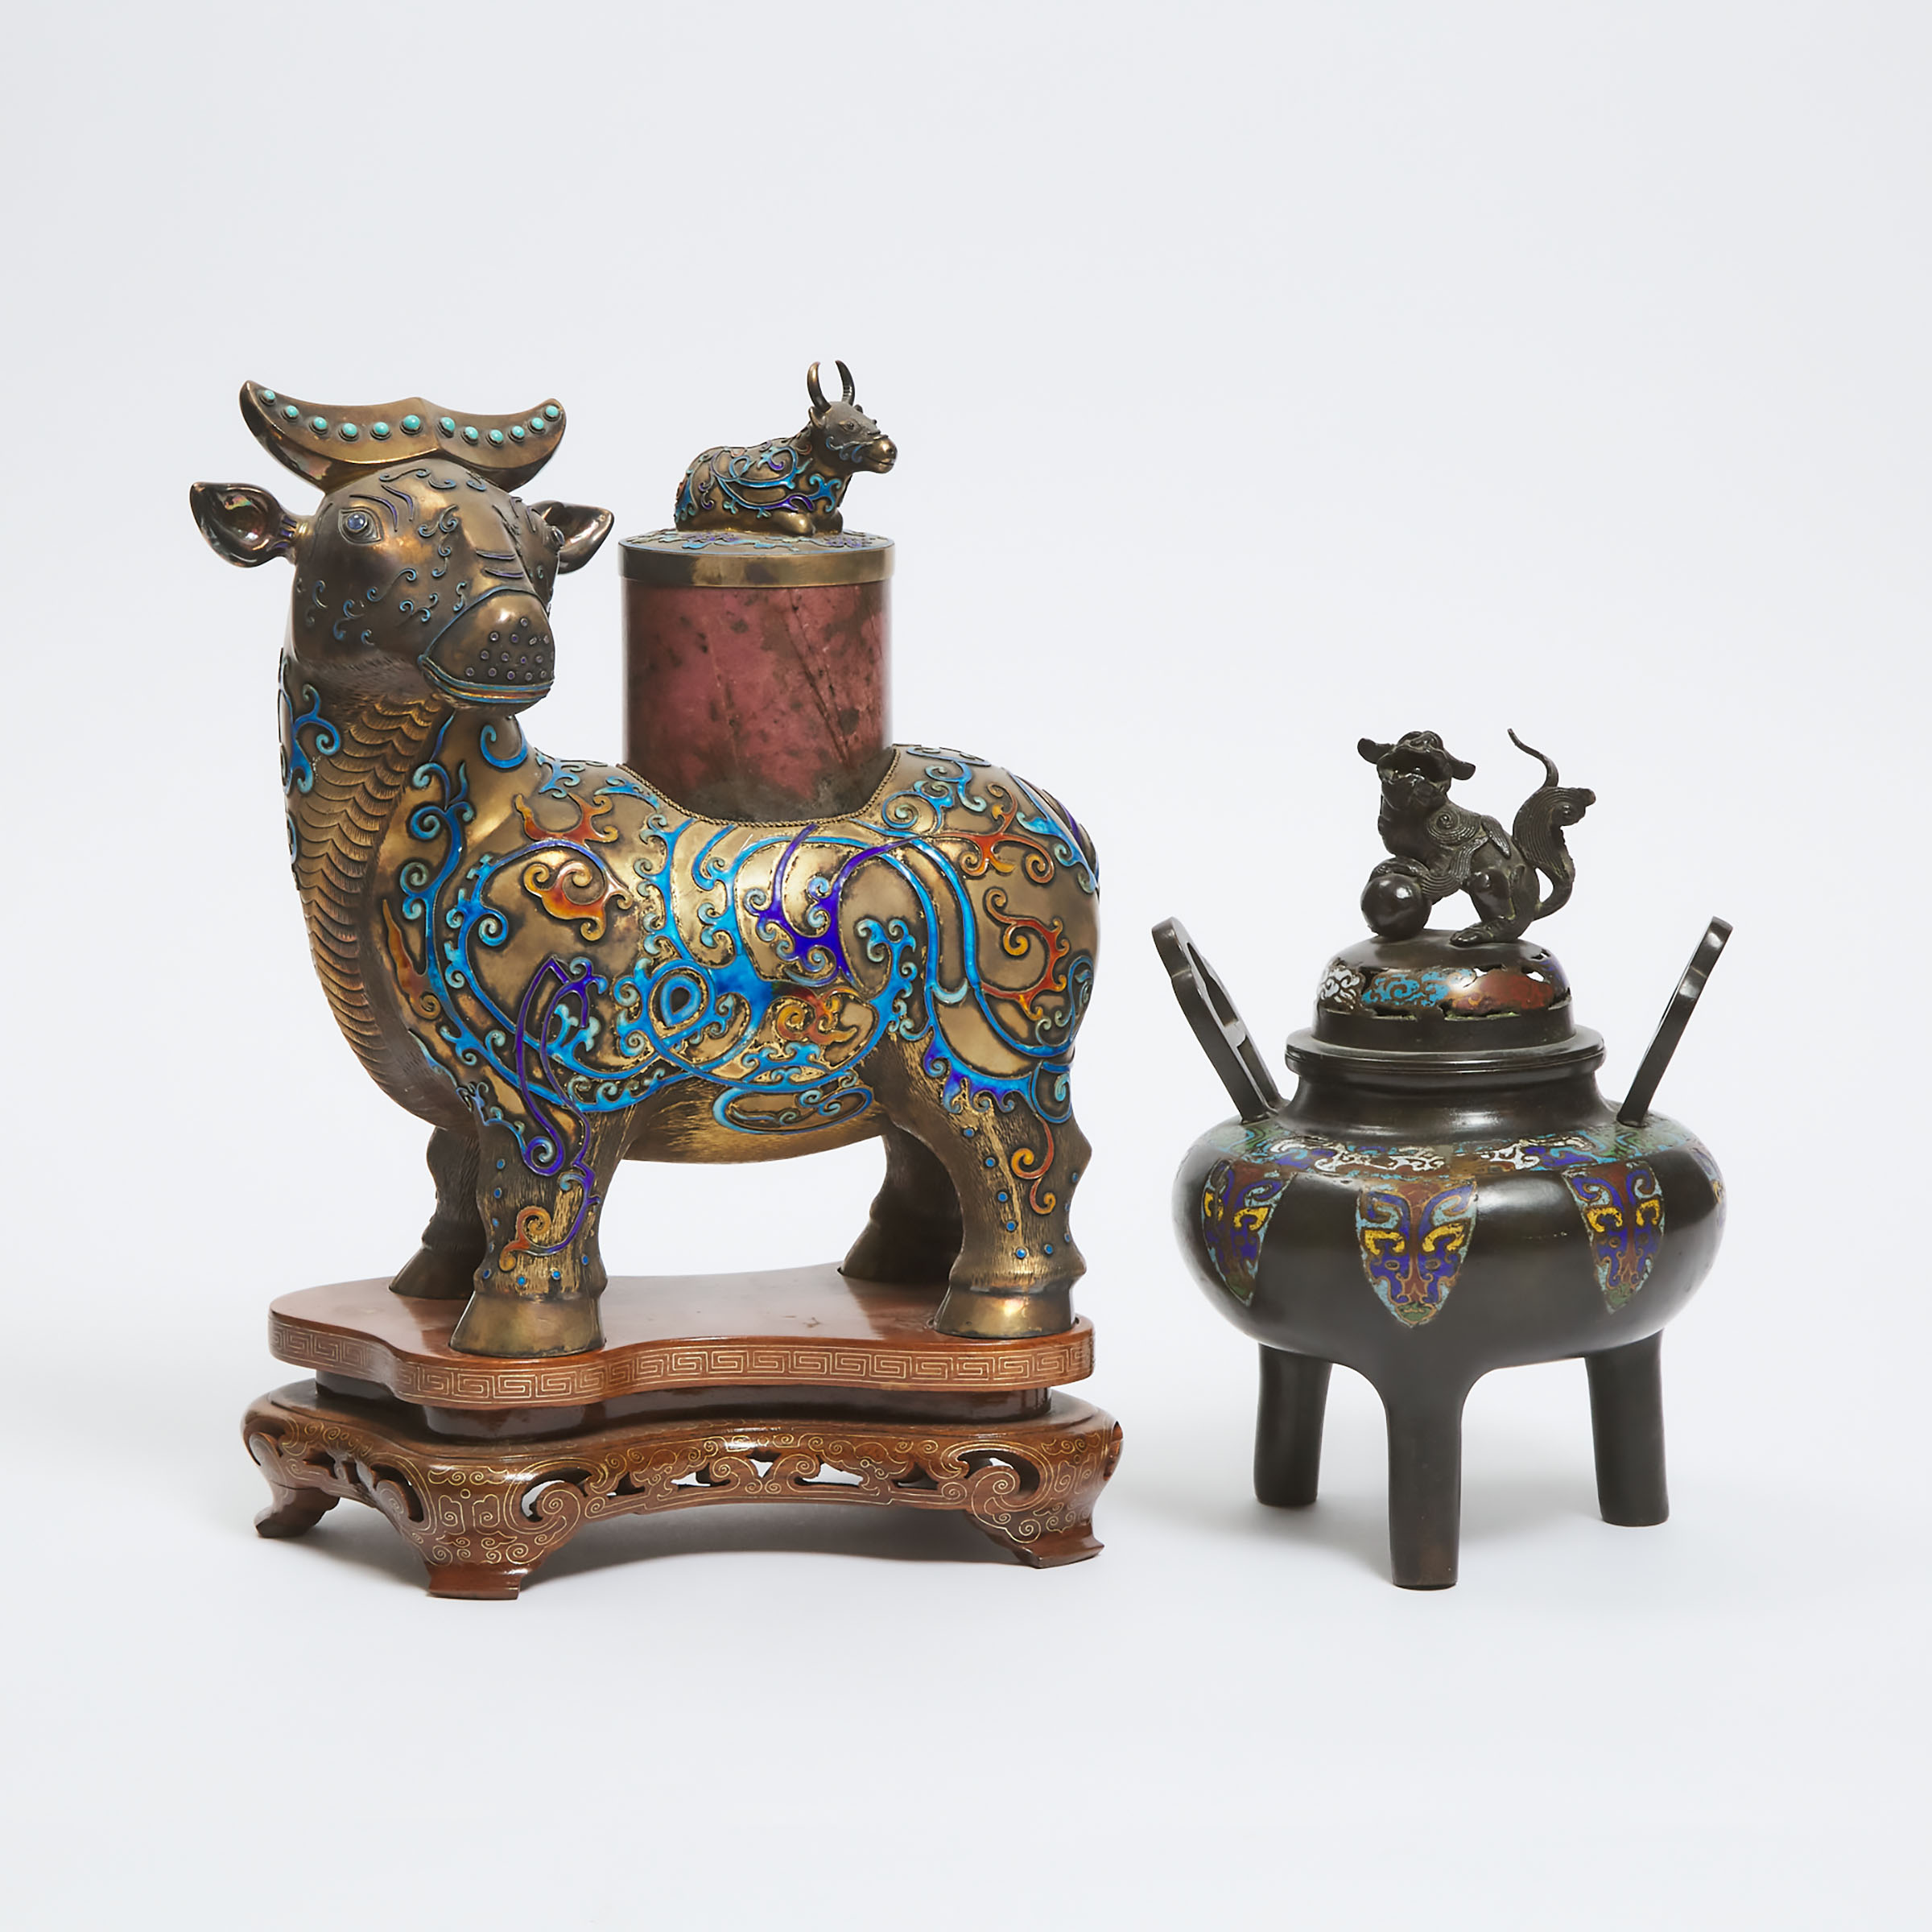 An Archaistic Enameled Bronze Buffalo-Form Vessel, Together With a Tripod Censer, Republican Period